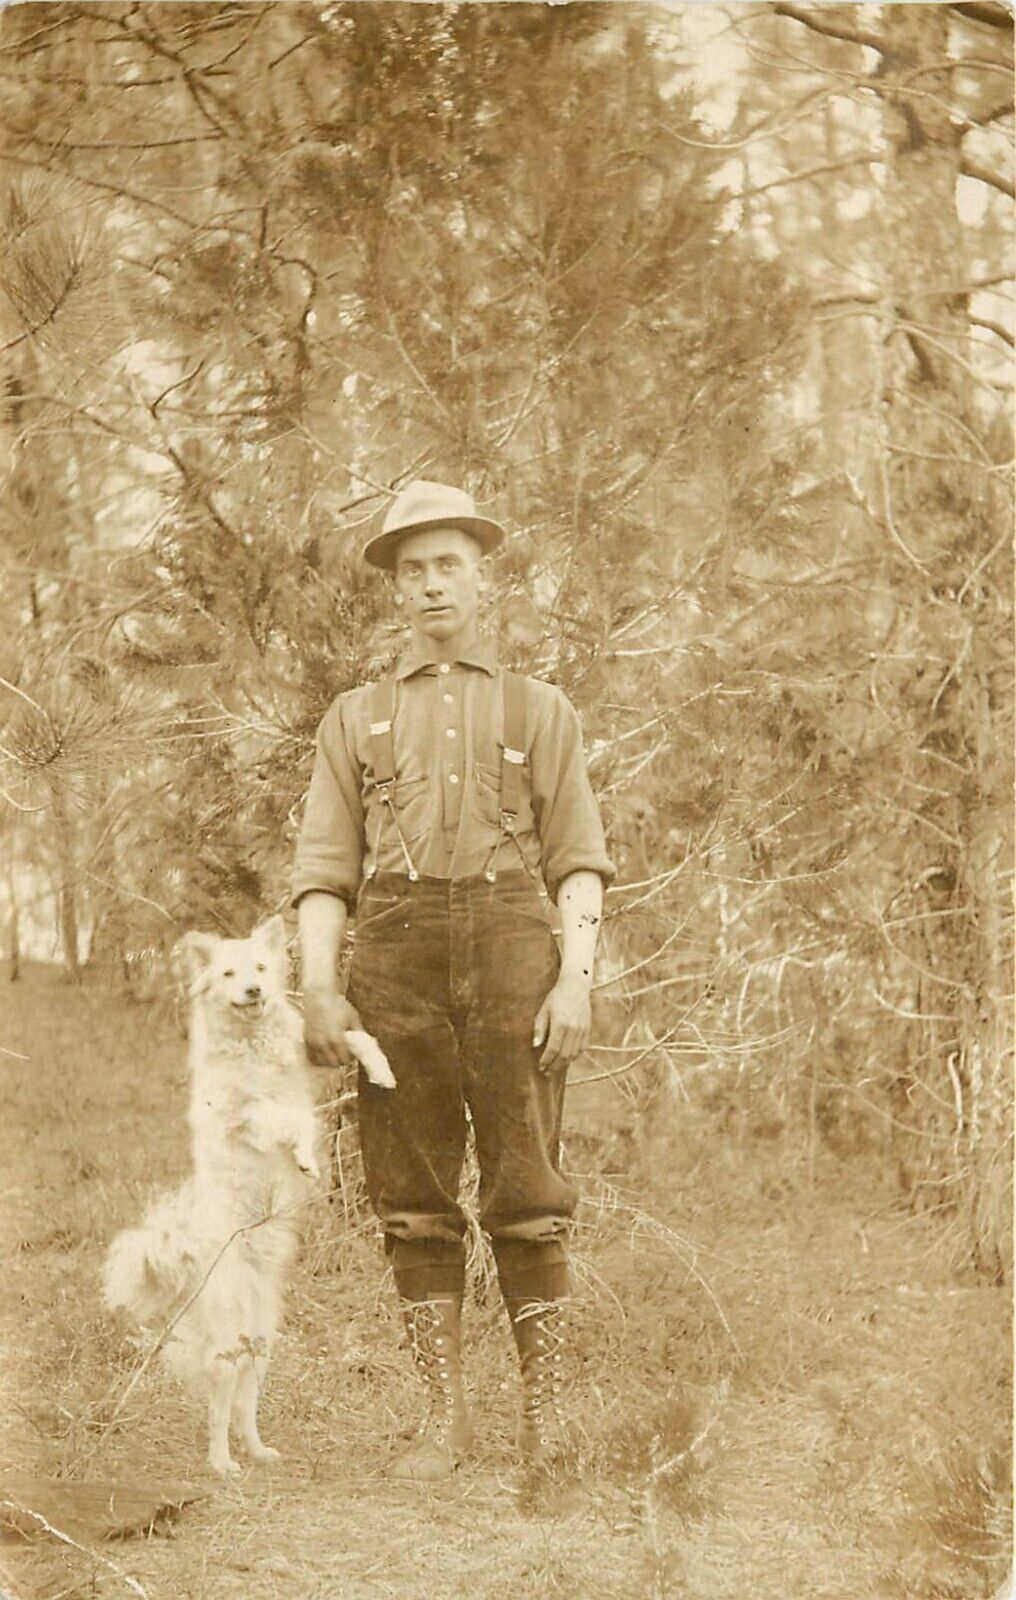 c1910 RPPC; Portrait of Harry Phillips Holding Paw of White Dog Standing Up